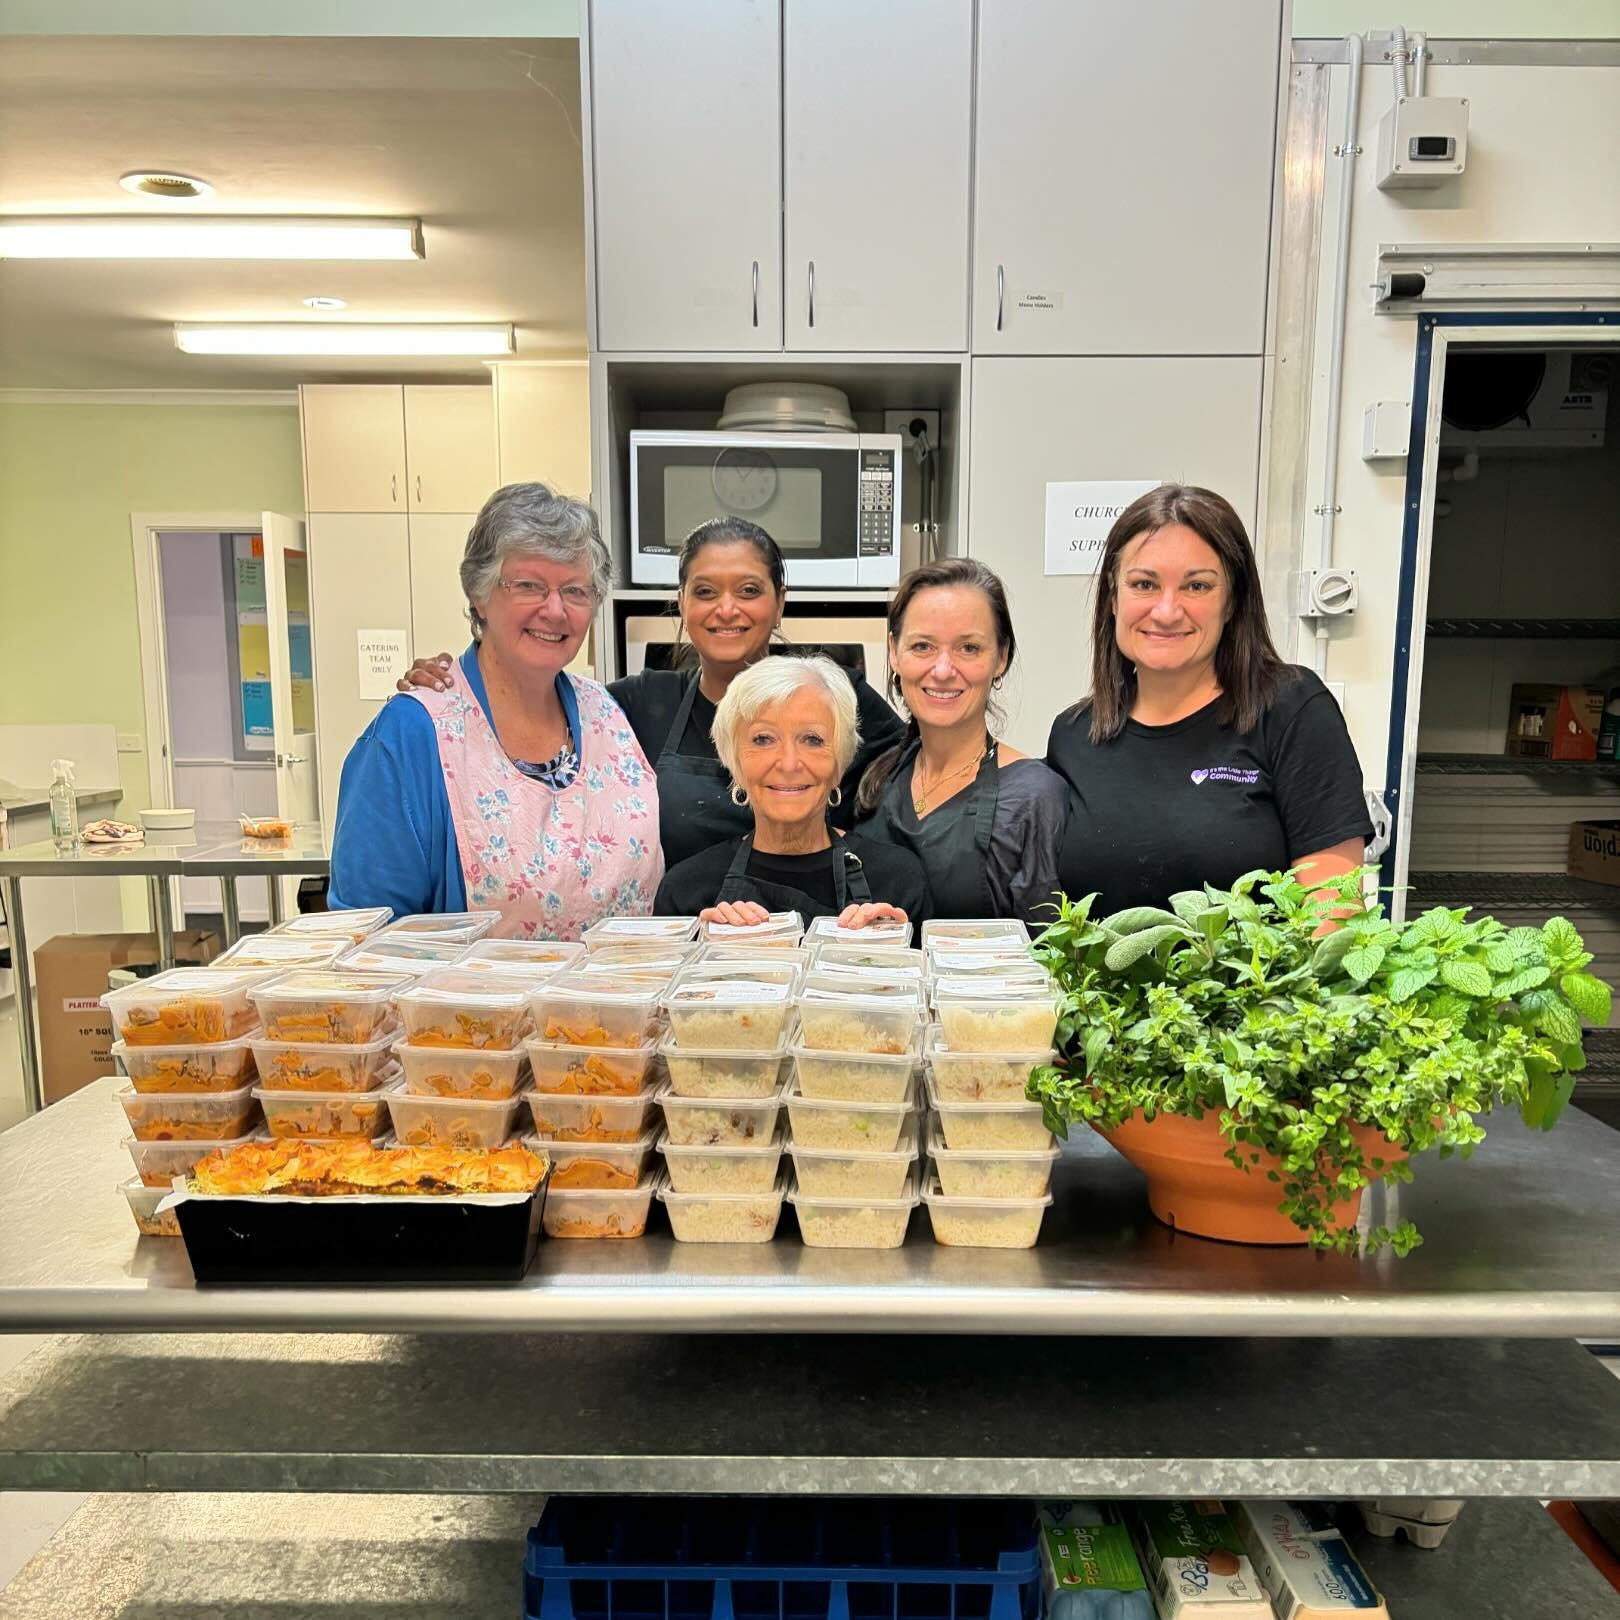 What a fun day we had at Christchurch, Castlemaine yesterday cooking meals for the vulnerable in their community.

We made 120 meals, including Sausage Pasta, Souffra and Asian Meatballs with Pilaf rice!

Thank you to all the volunteers involved!